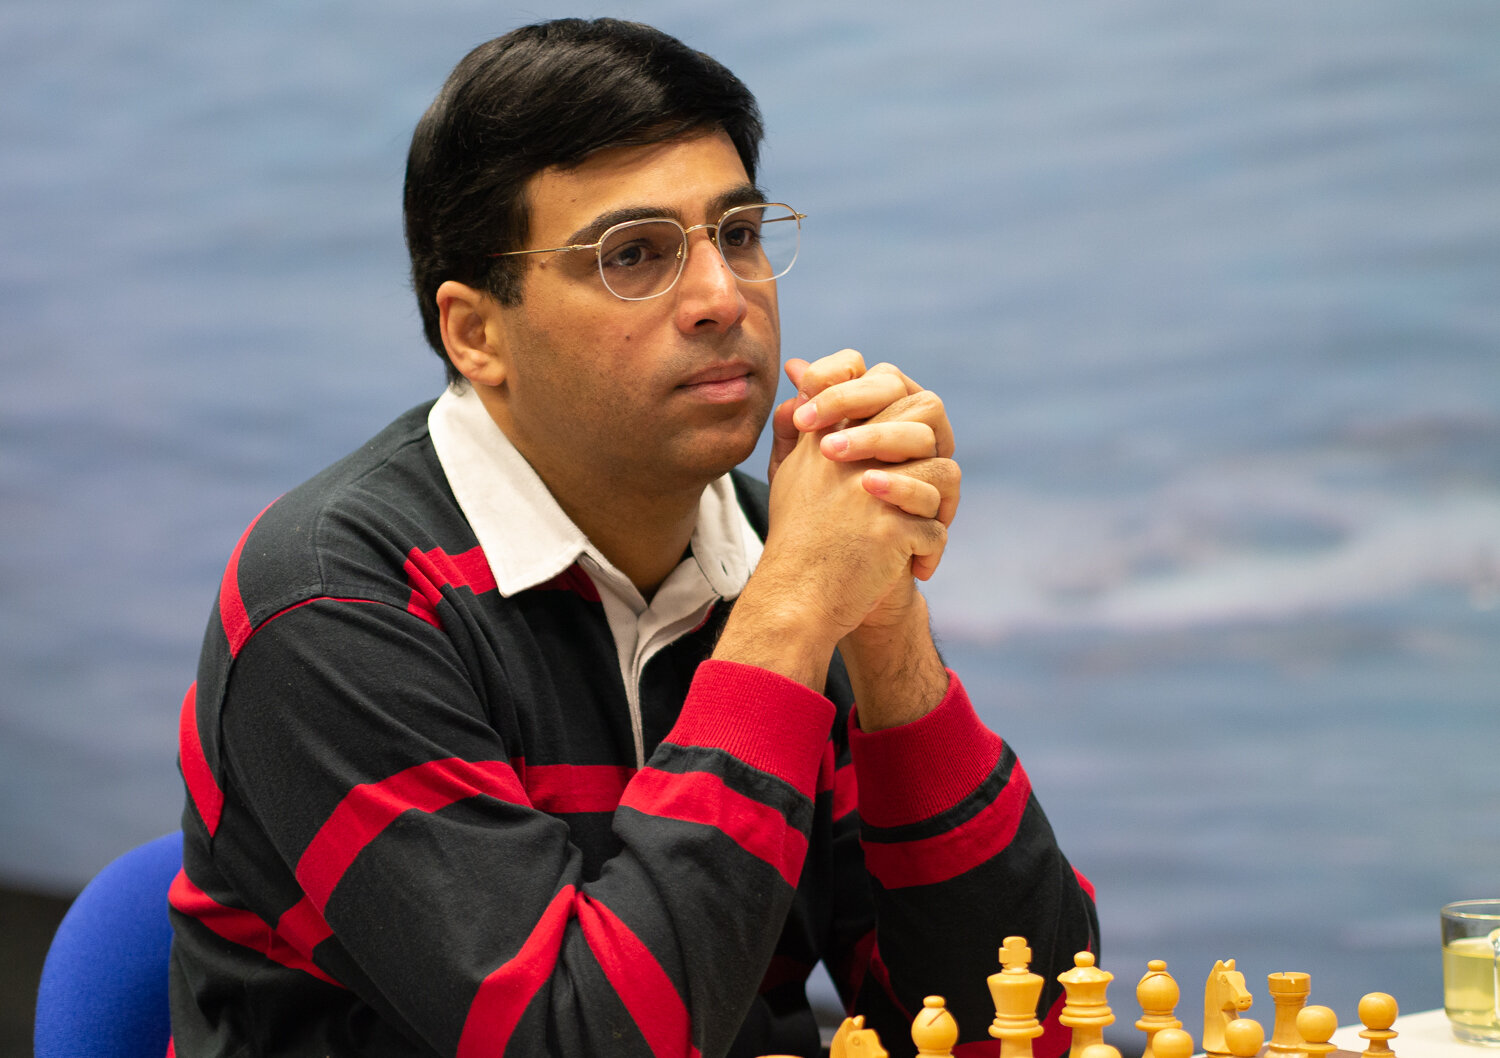 Happy birthday to five-time World Chess Champion and one of the greatest  players of all time, Viswanathan Anand!